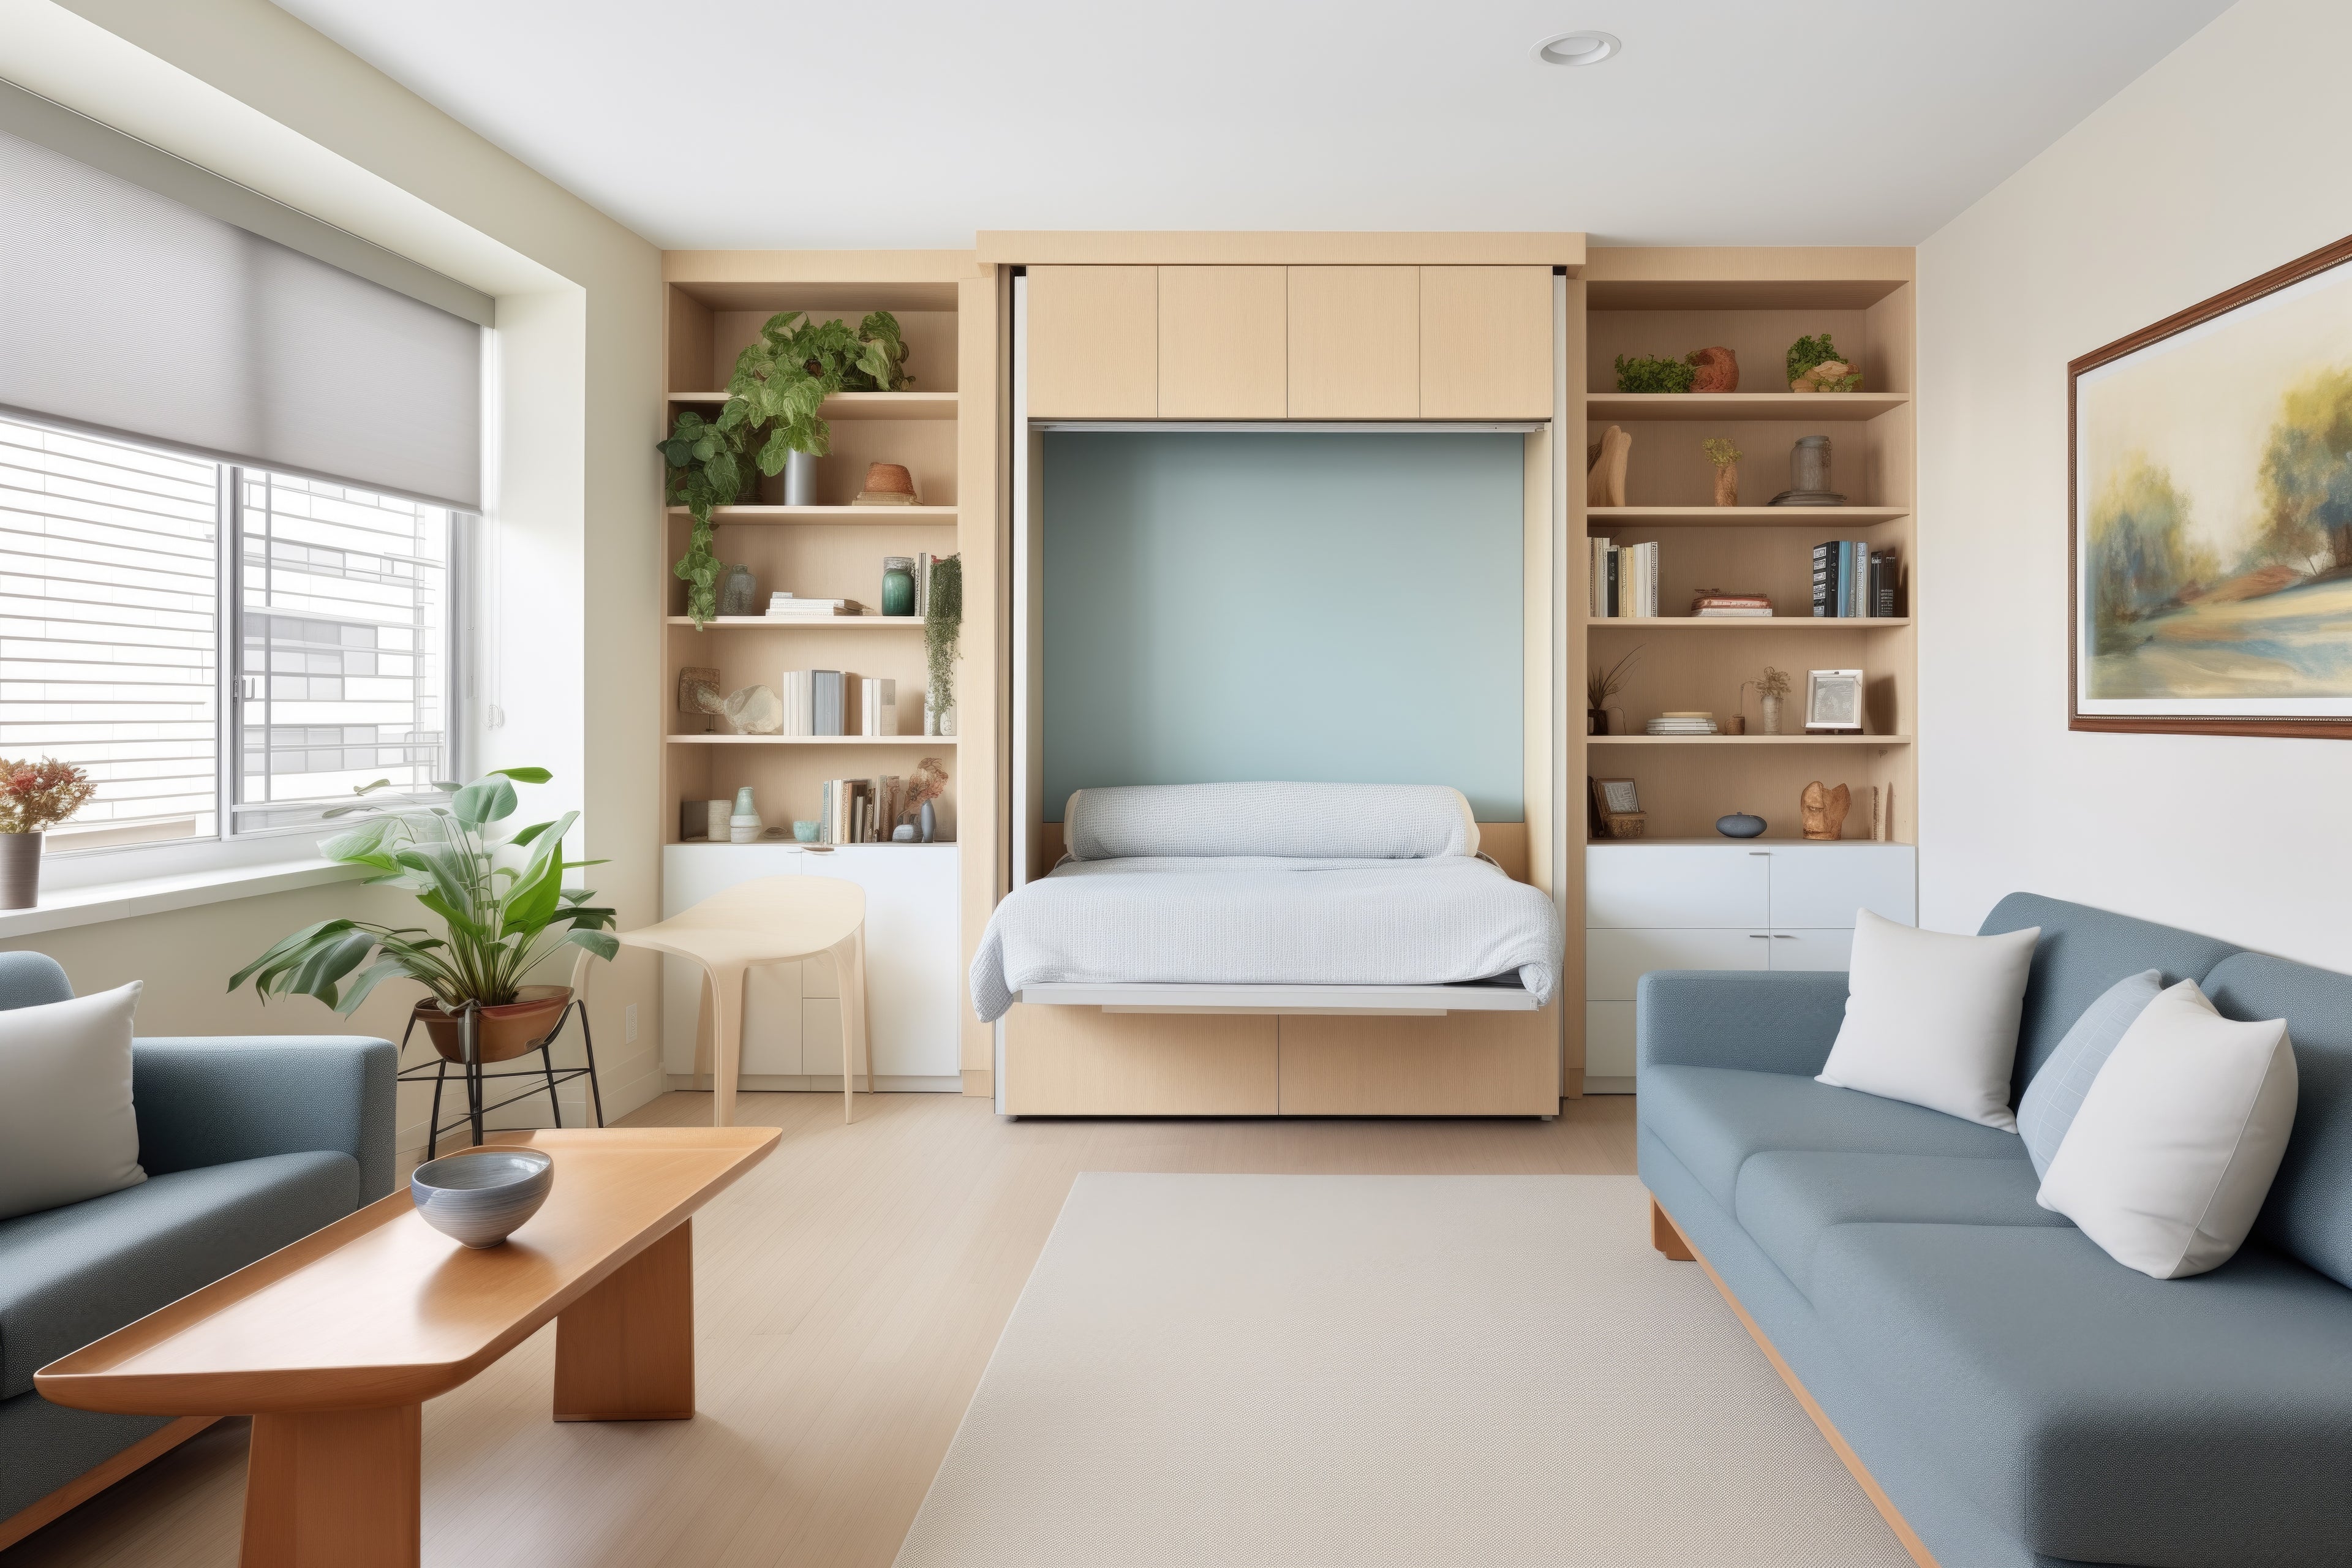 Murphy Nook smart beds, wall beds, sleek solutions for small spaces